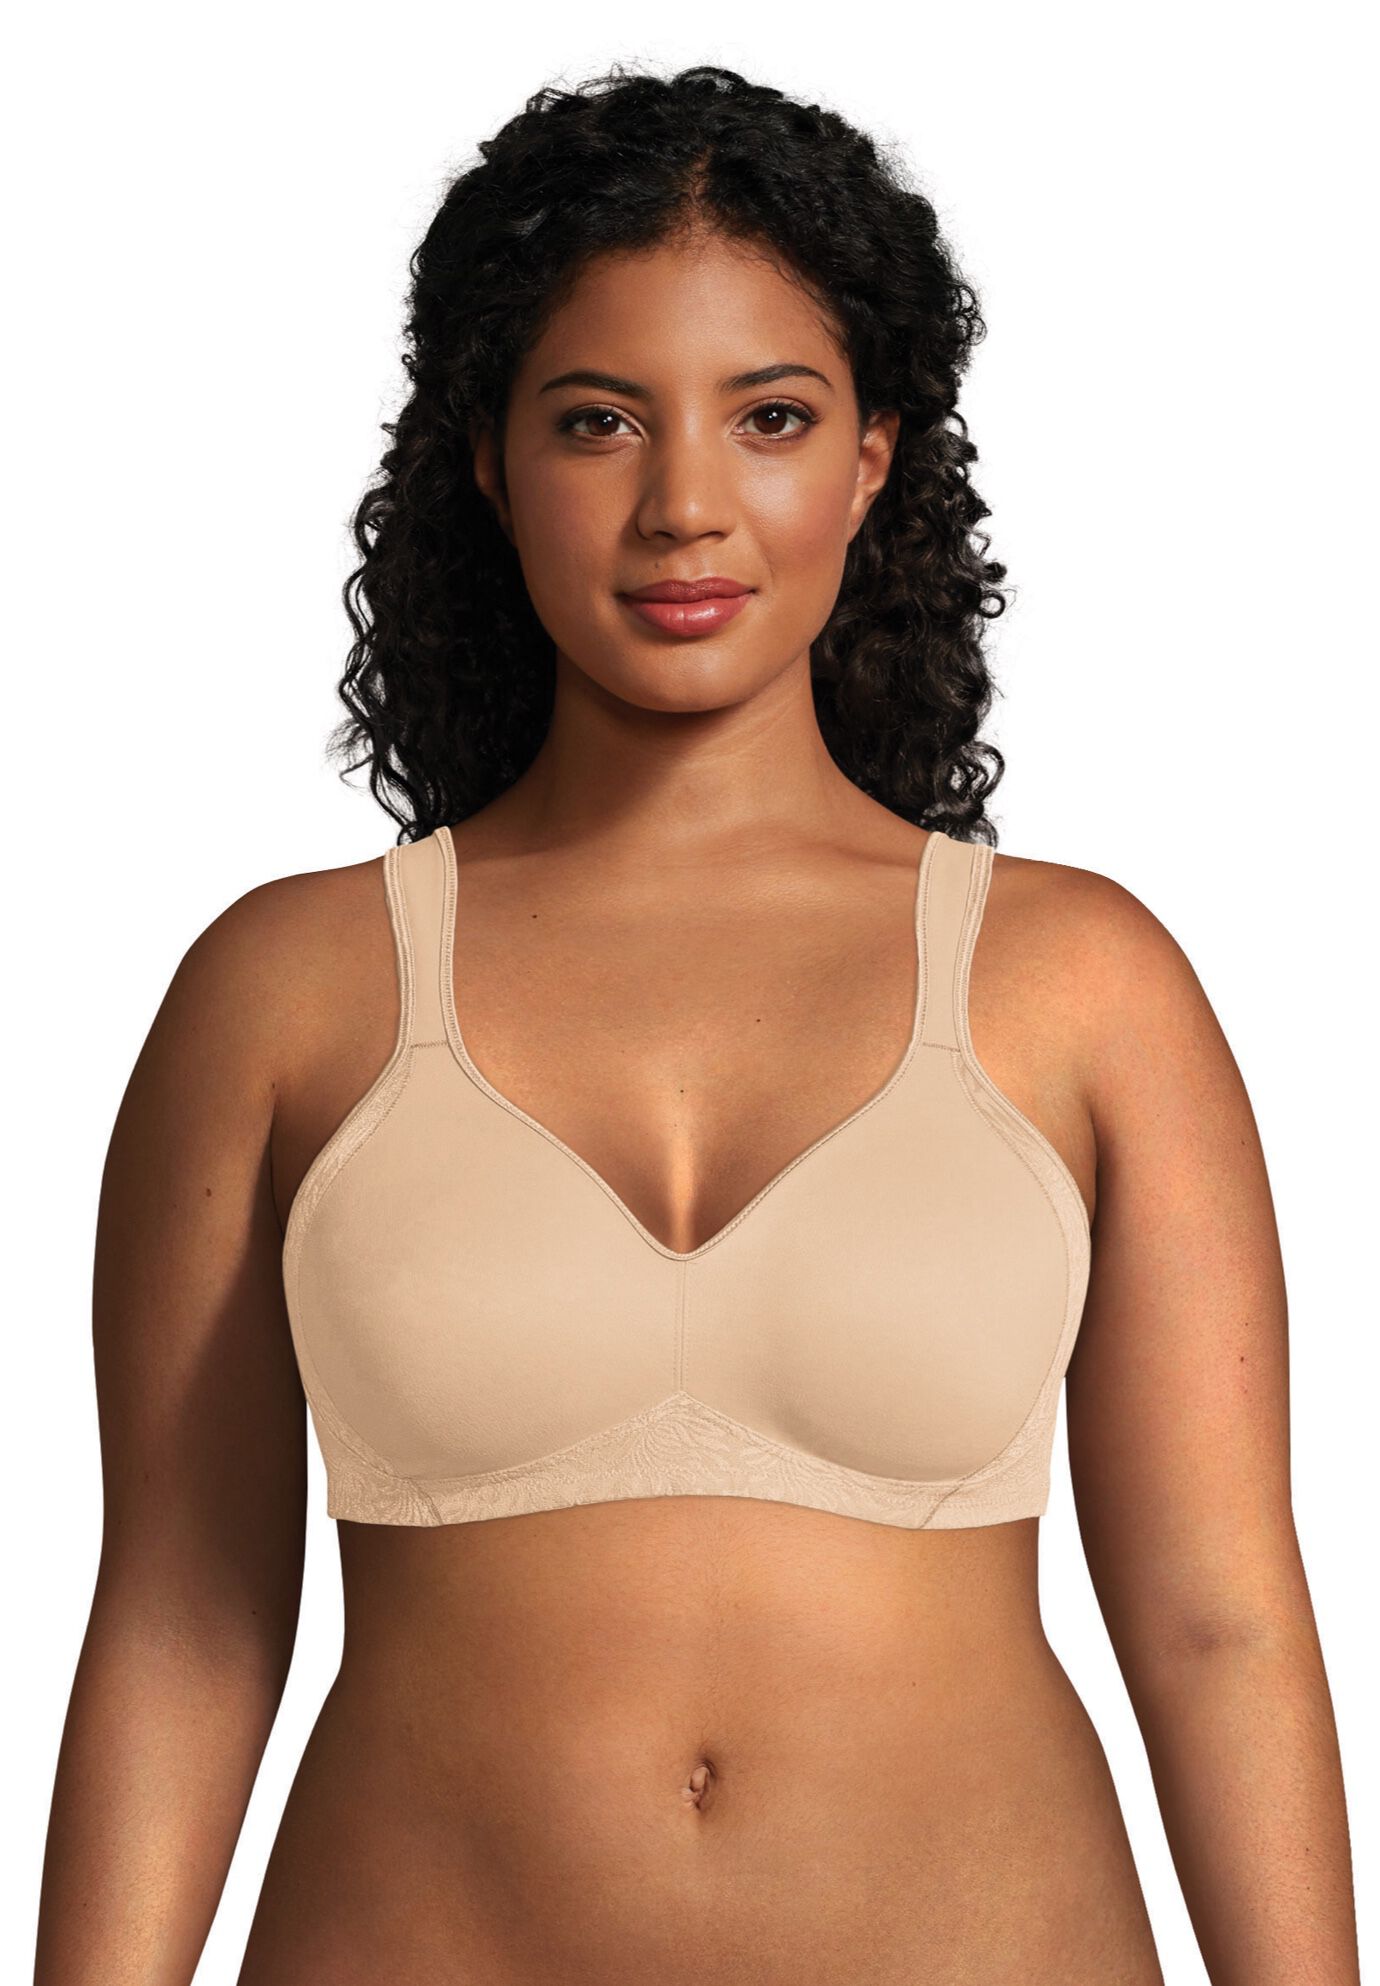 Plus Size Women's 18 Hour Back And Side Smoothing Wirefree Bra US4049 by Playtex in Nude (Size 38 DDD)